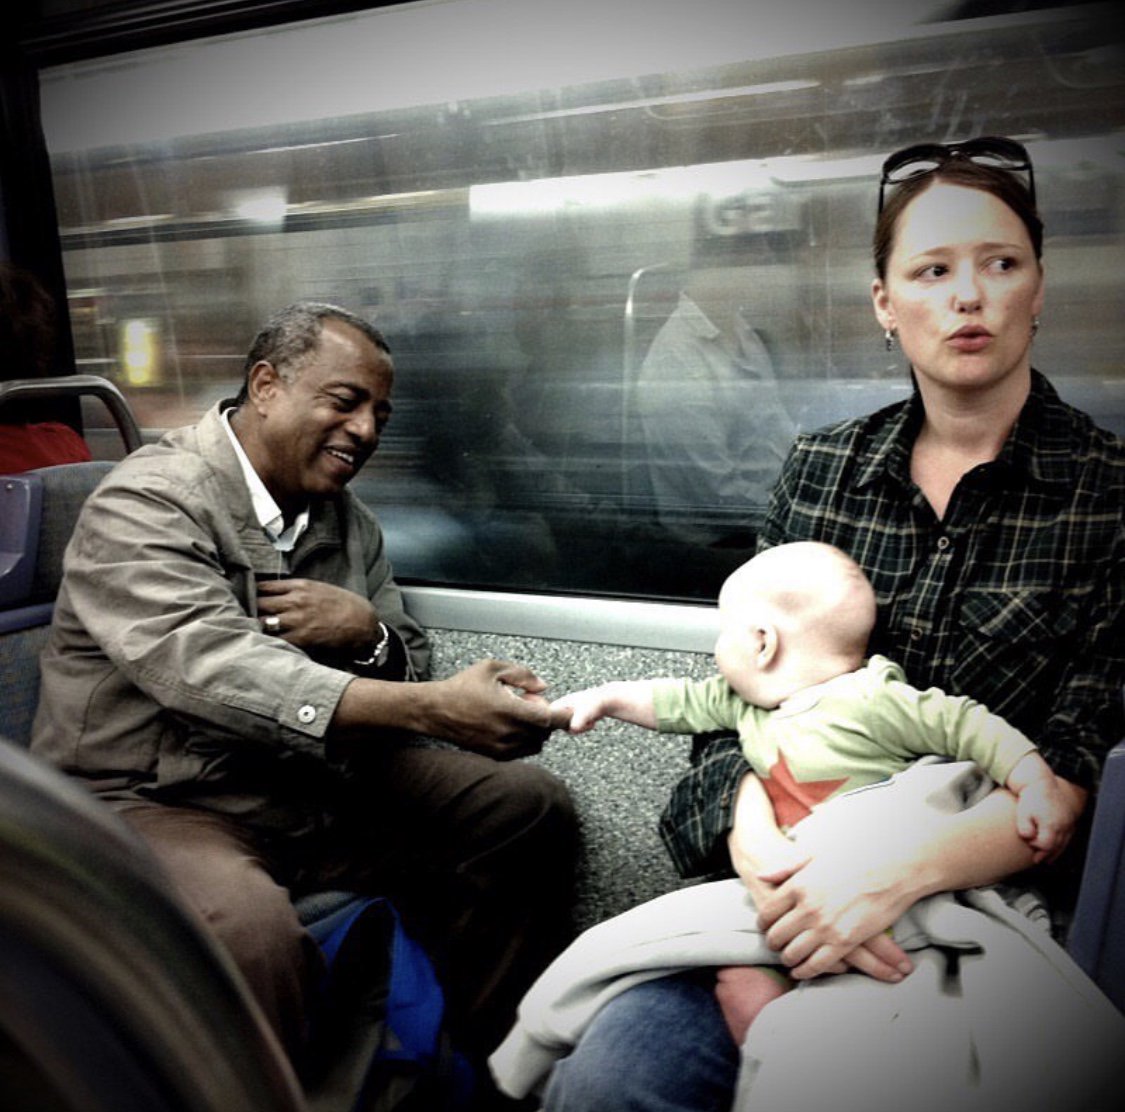 A Moment On The Metro